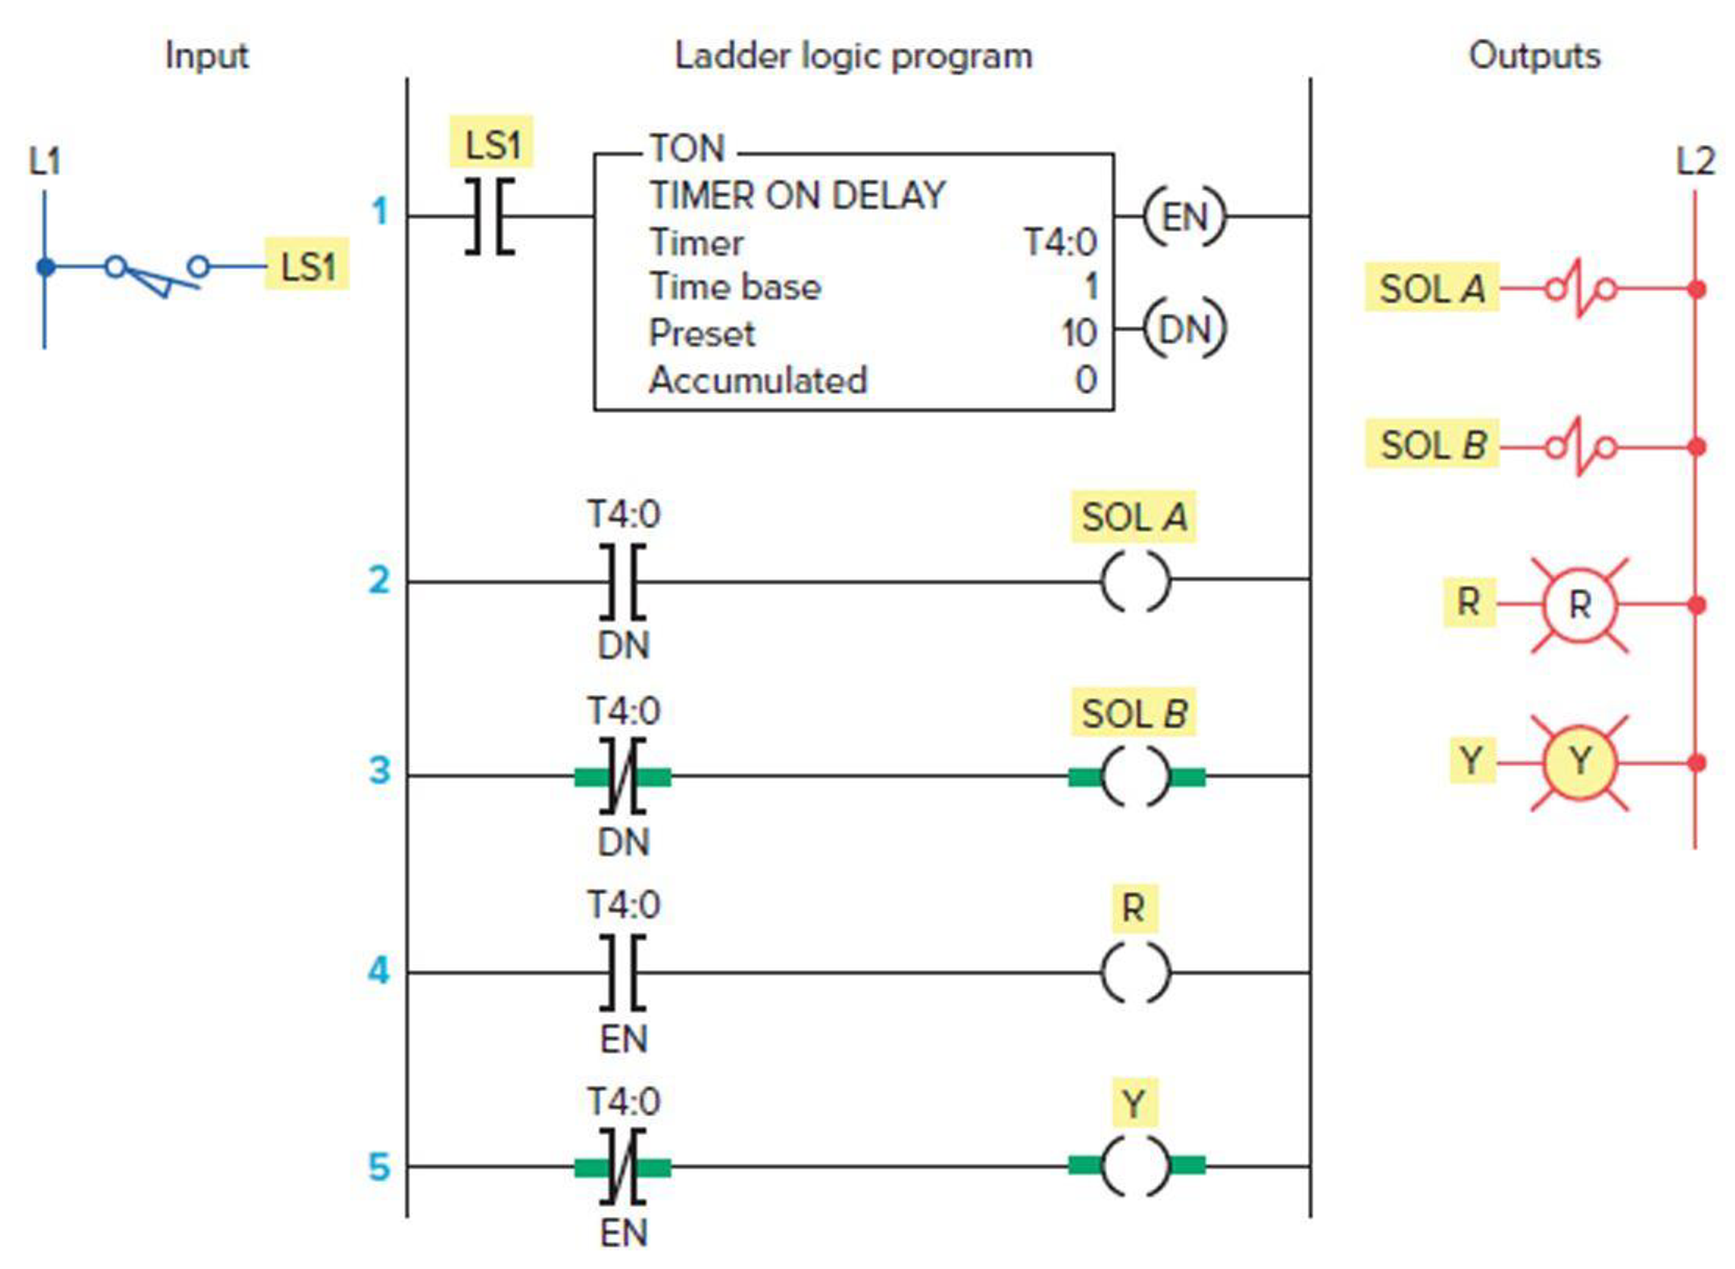 Chapter 7, Problem 3P, Study the ladder logic program in Figure 7-40 and answer the questions that follow: a. What type of 